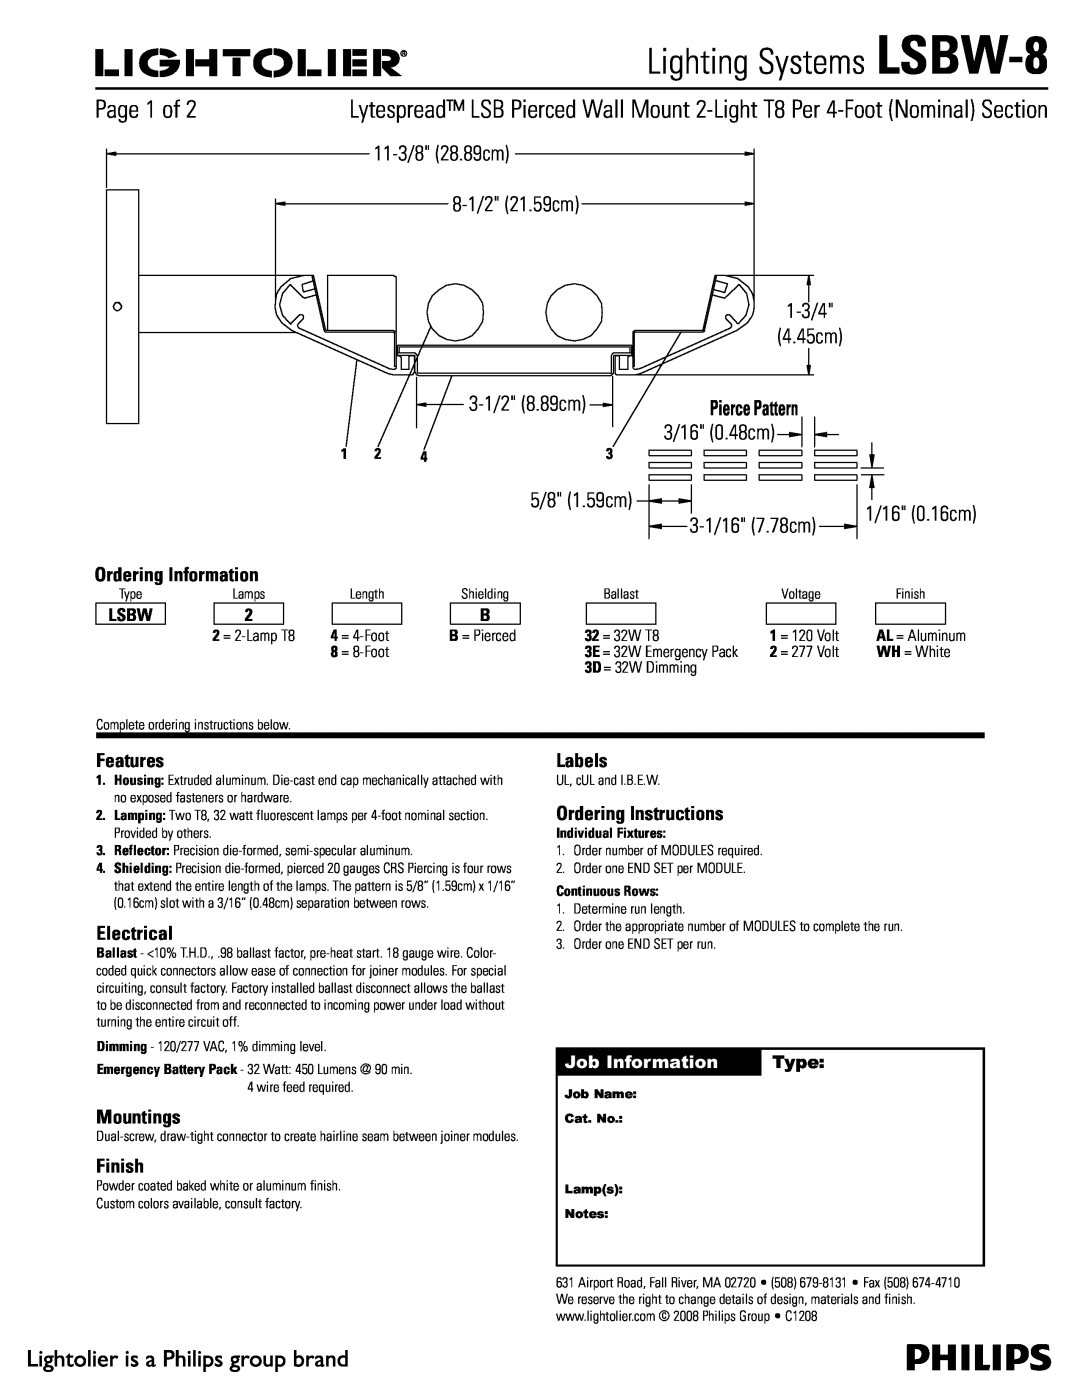 Lightolier LSBW-8 manual 1BHFPG, Features, Electrical, Mountings, Finish, Labels, Ordering Instructions, Lsbw, Type 